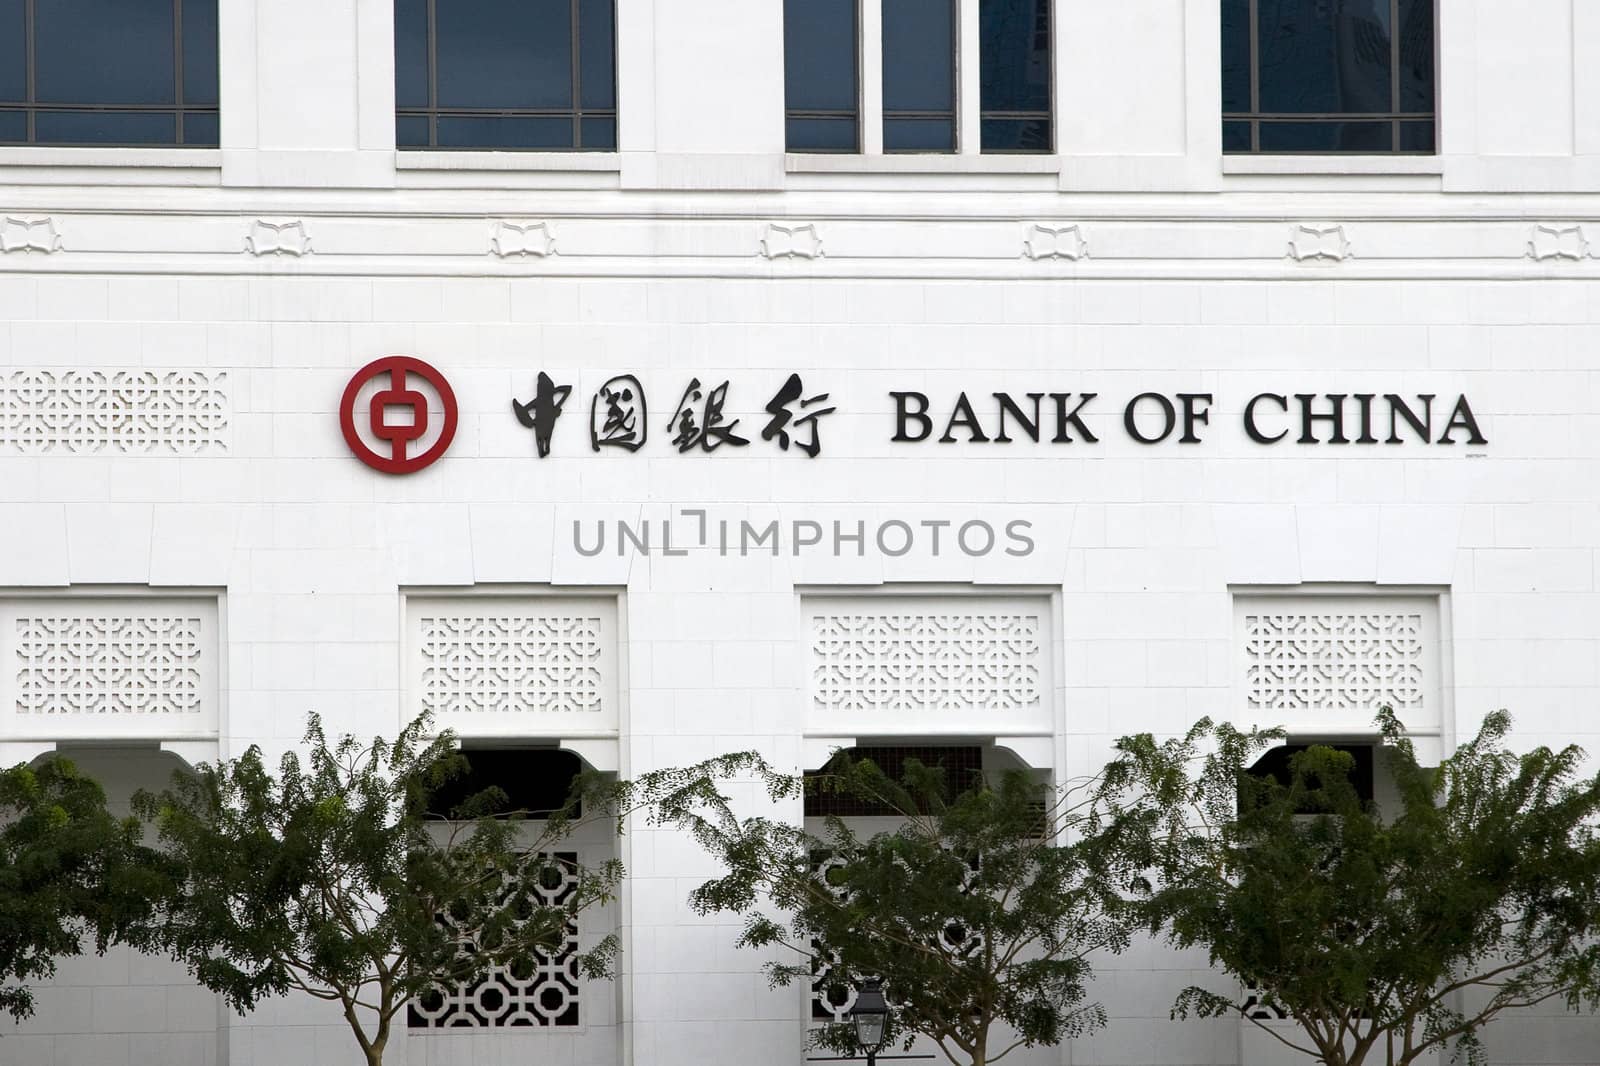 Bank of China in Singapore is located in the business district, and is one of the first international branches of the Bank since it's establishment in Hong Kong in 1917